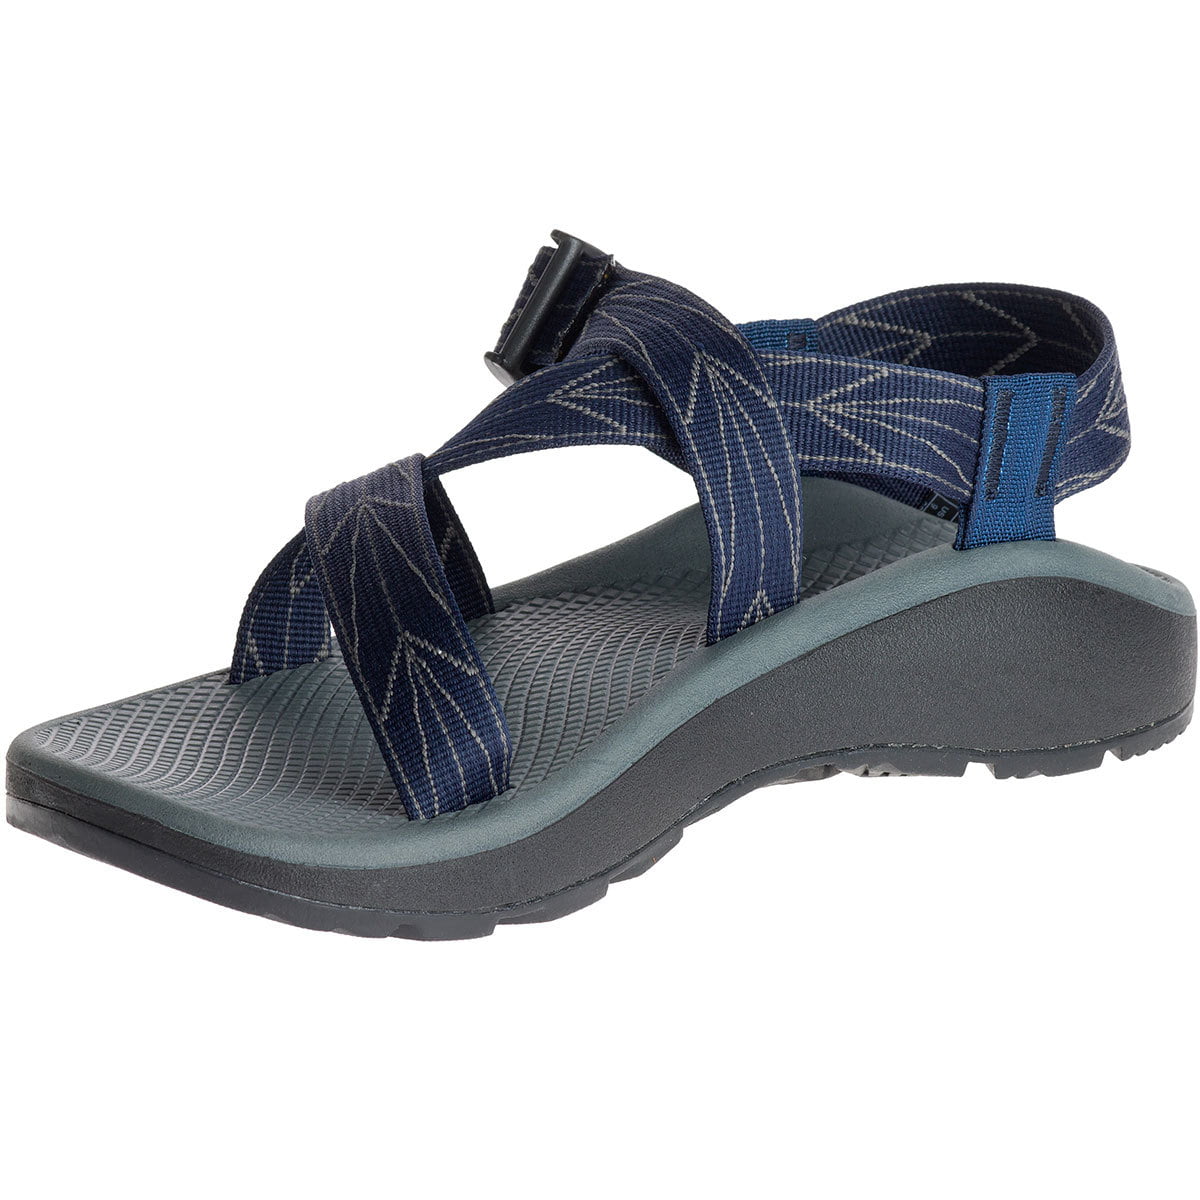 chacos wide mens